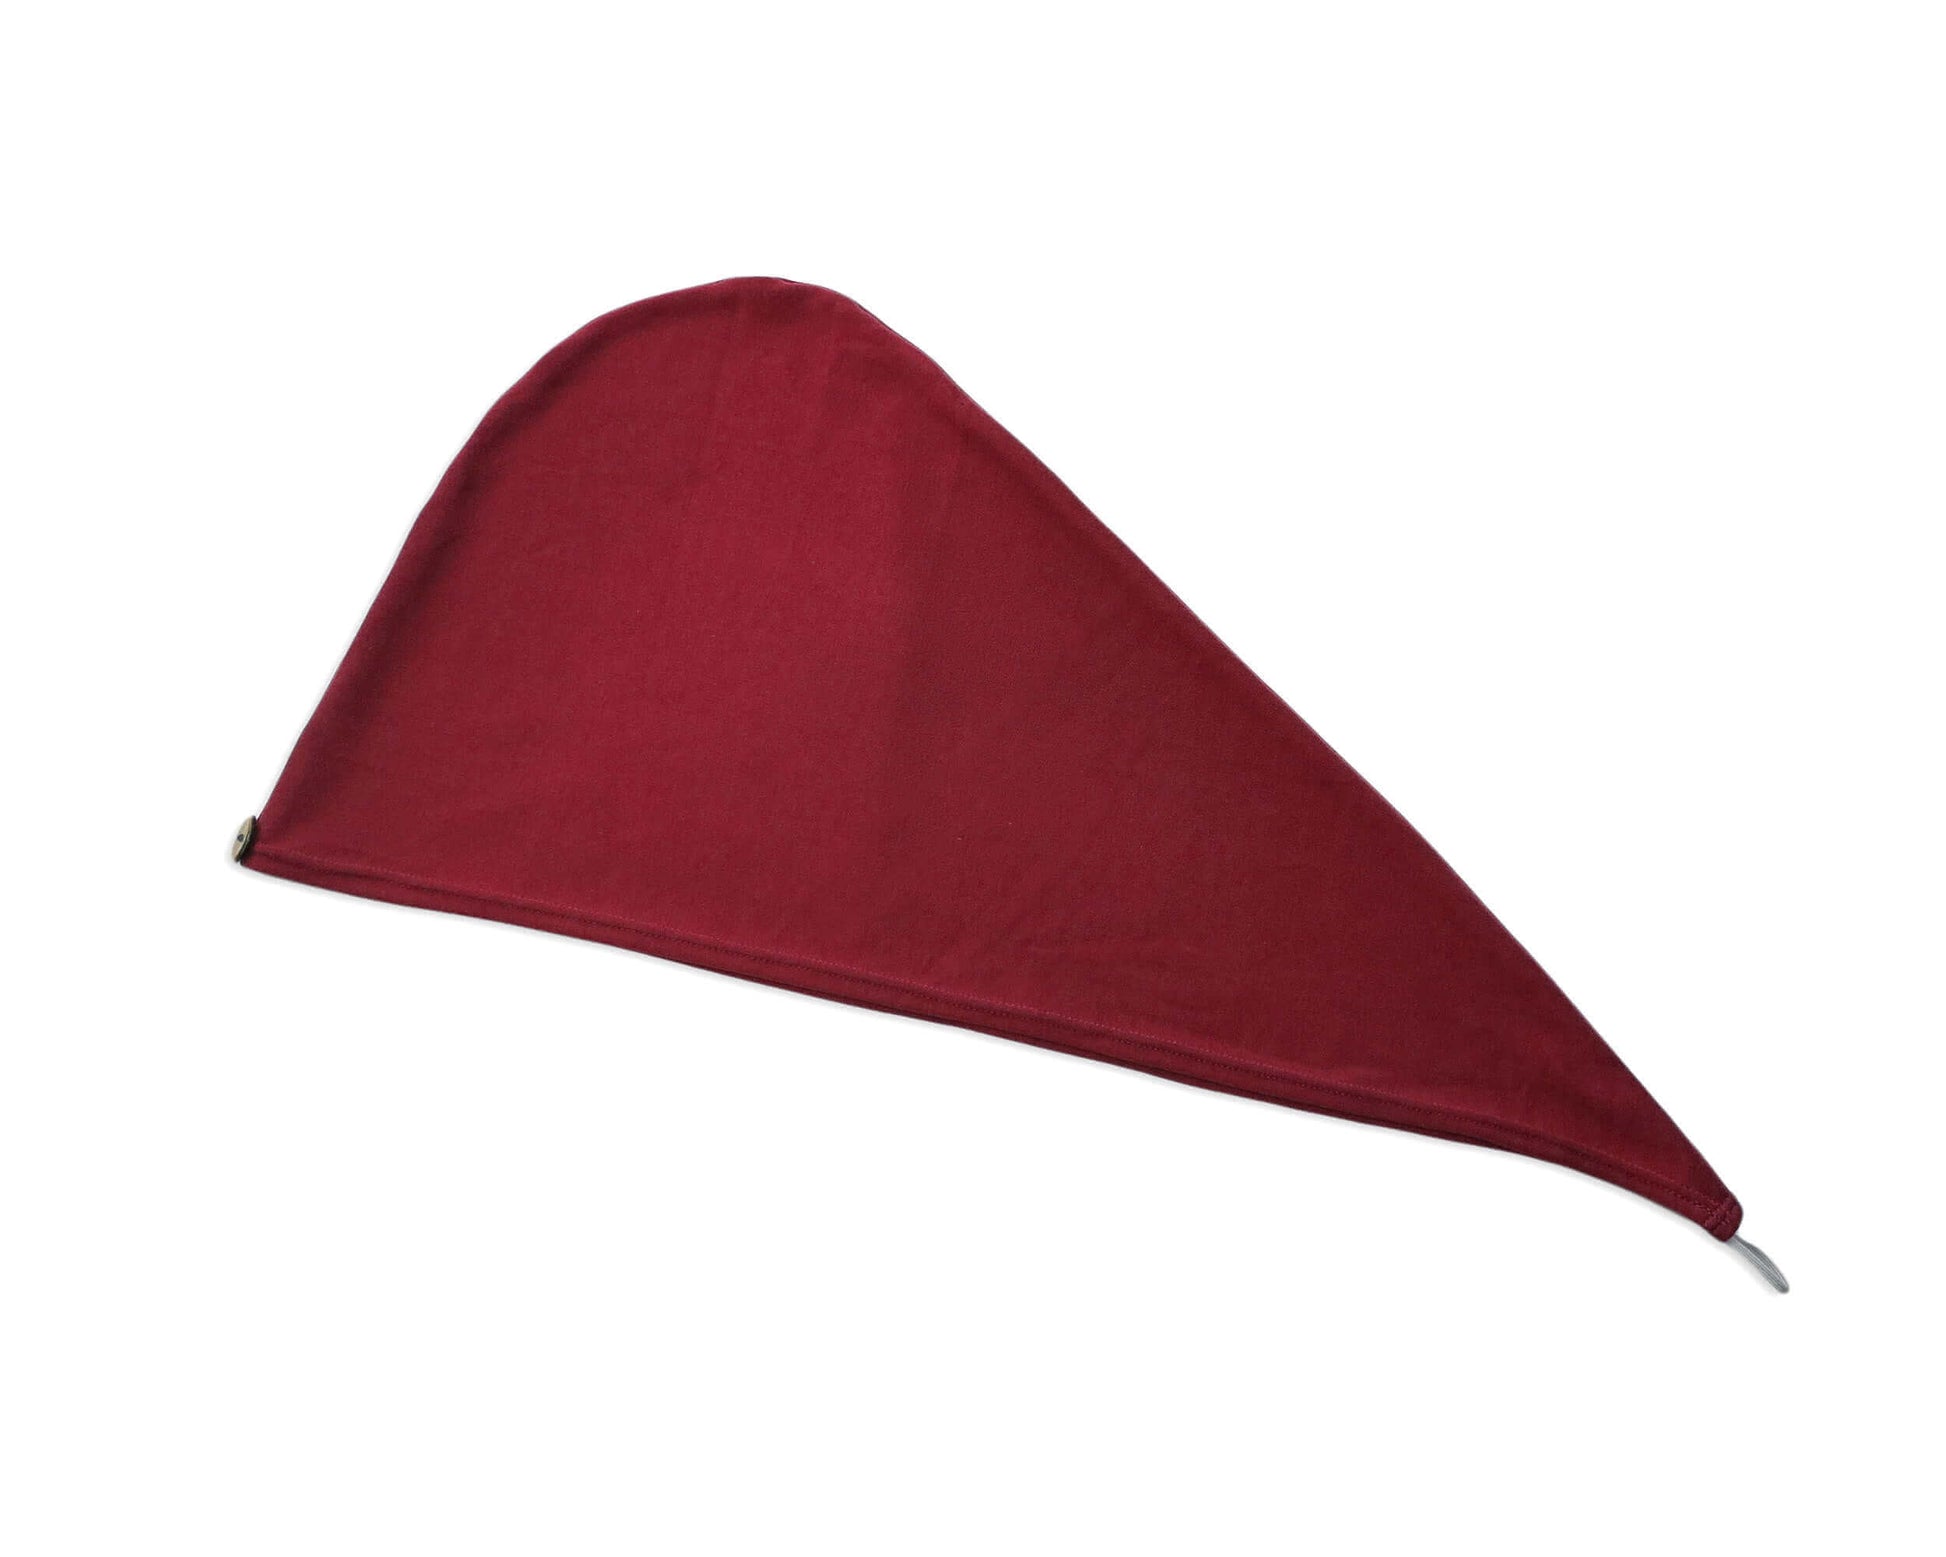 Red Burgundy T-Shirt Hair Towel Hood for Curly, Wavy, and Straight Hair - Soft, Absorbent, and Eco-Friendly